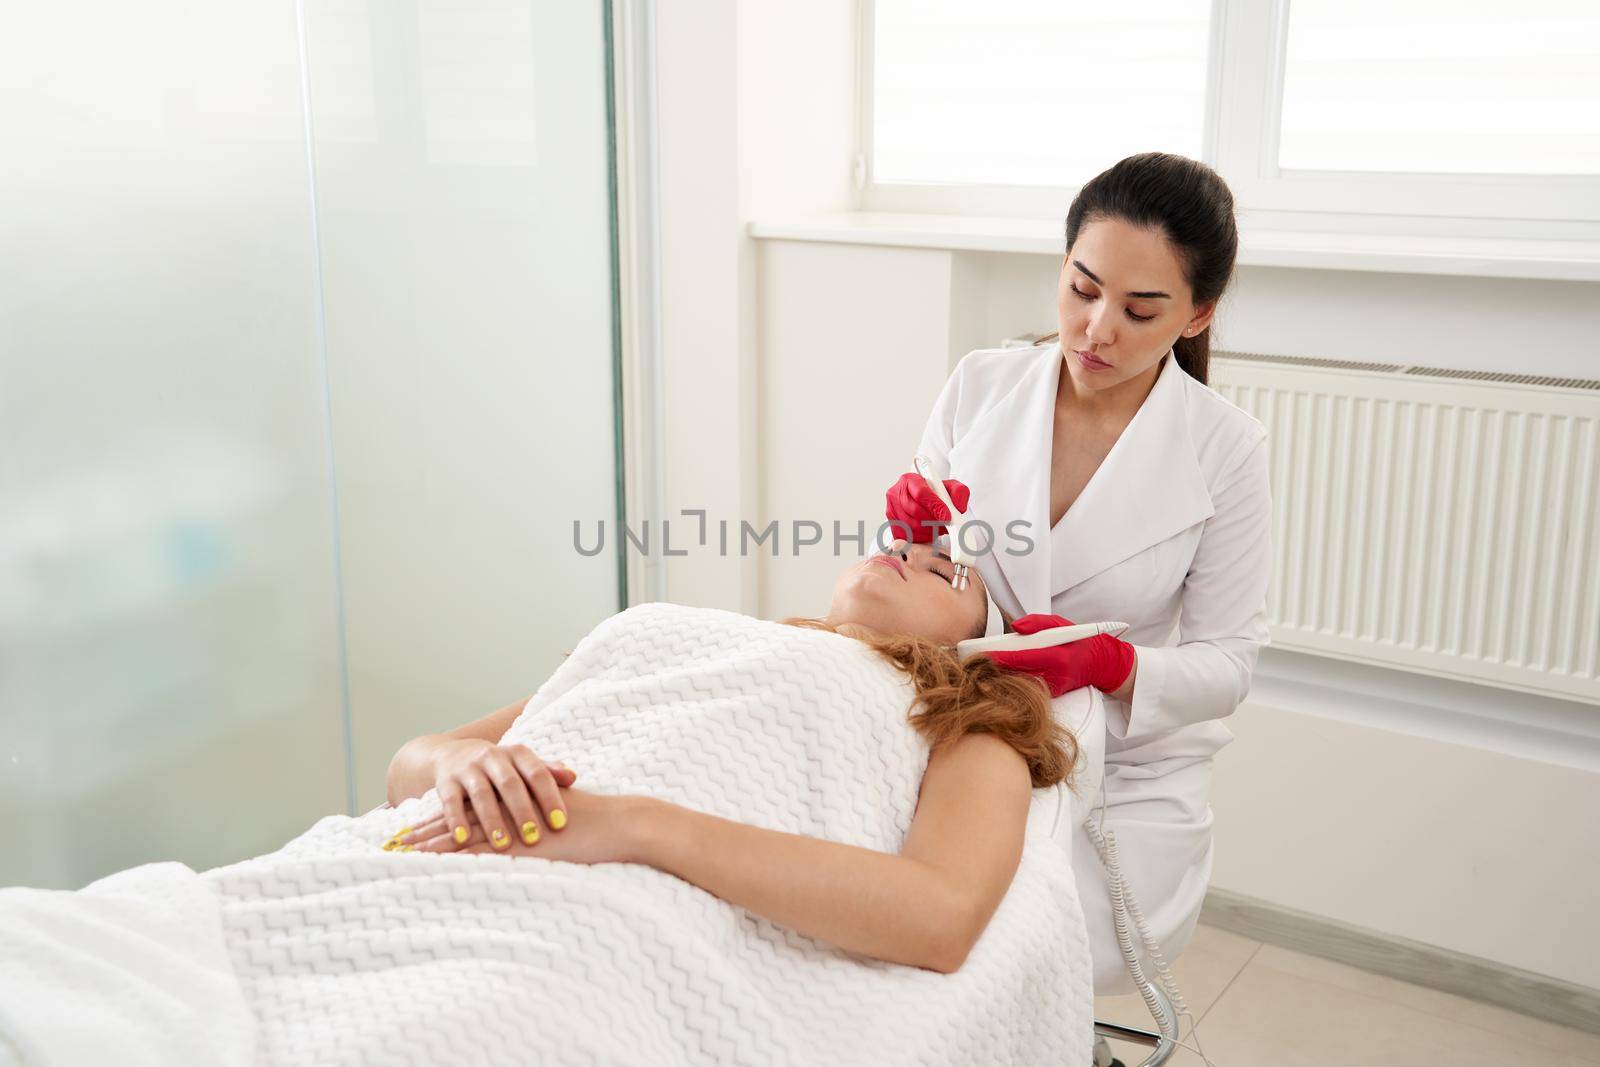 Beautiful Woman At Spa Clinic Receiving Stimulating Electric Facial Treatment From Therapist. Closeup Of Young Female Face During Microcurrent Therapy